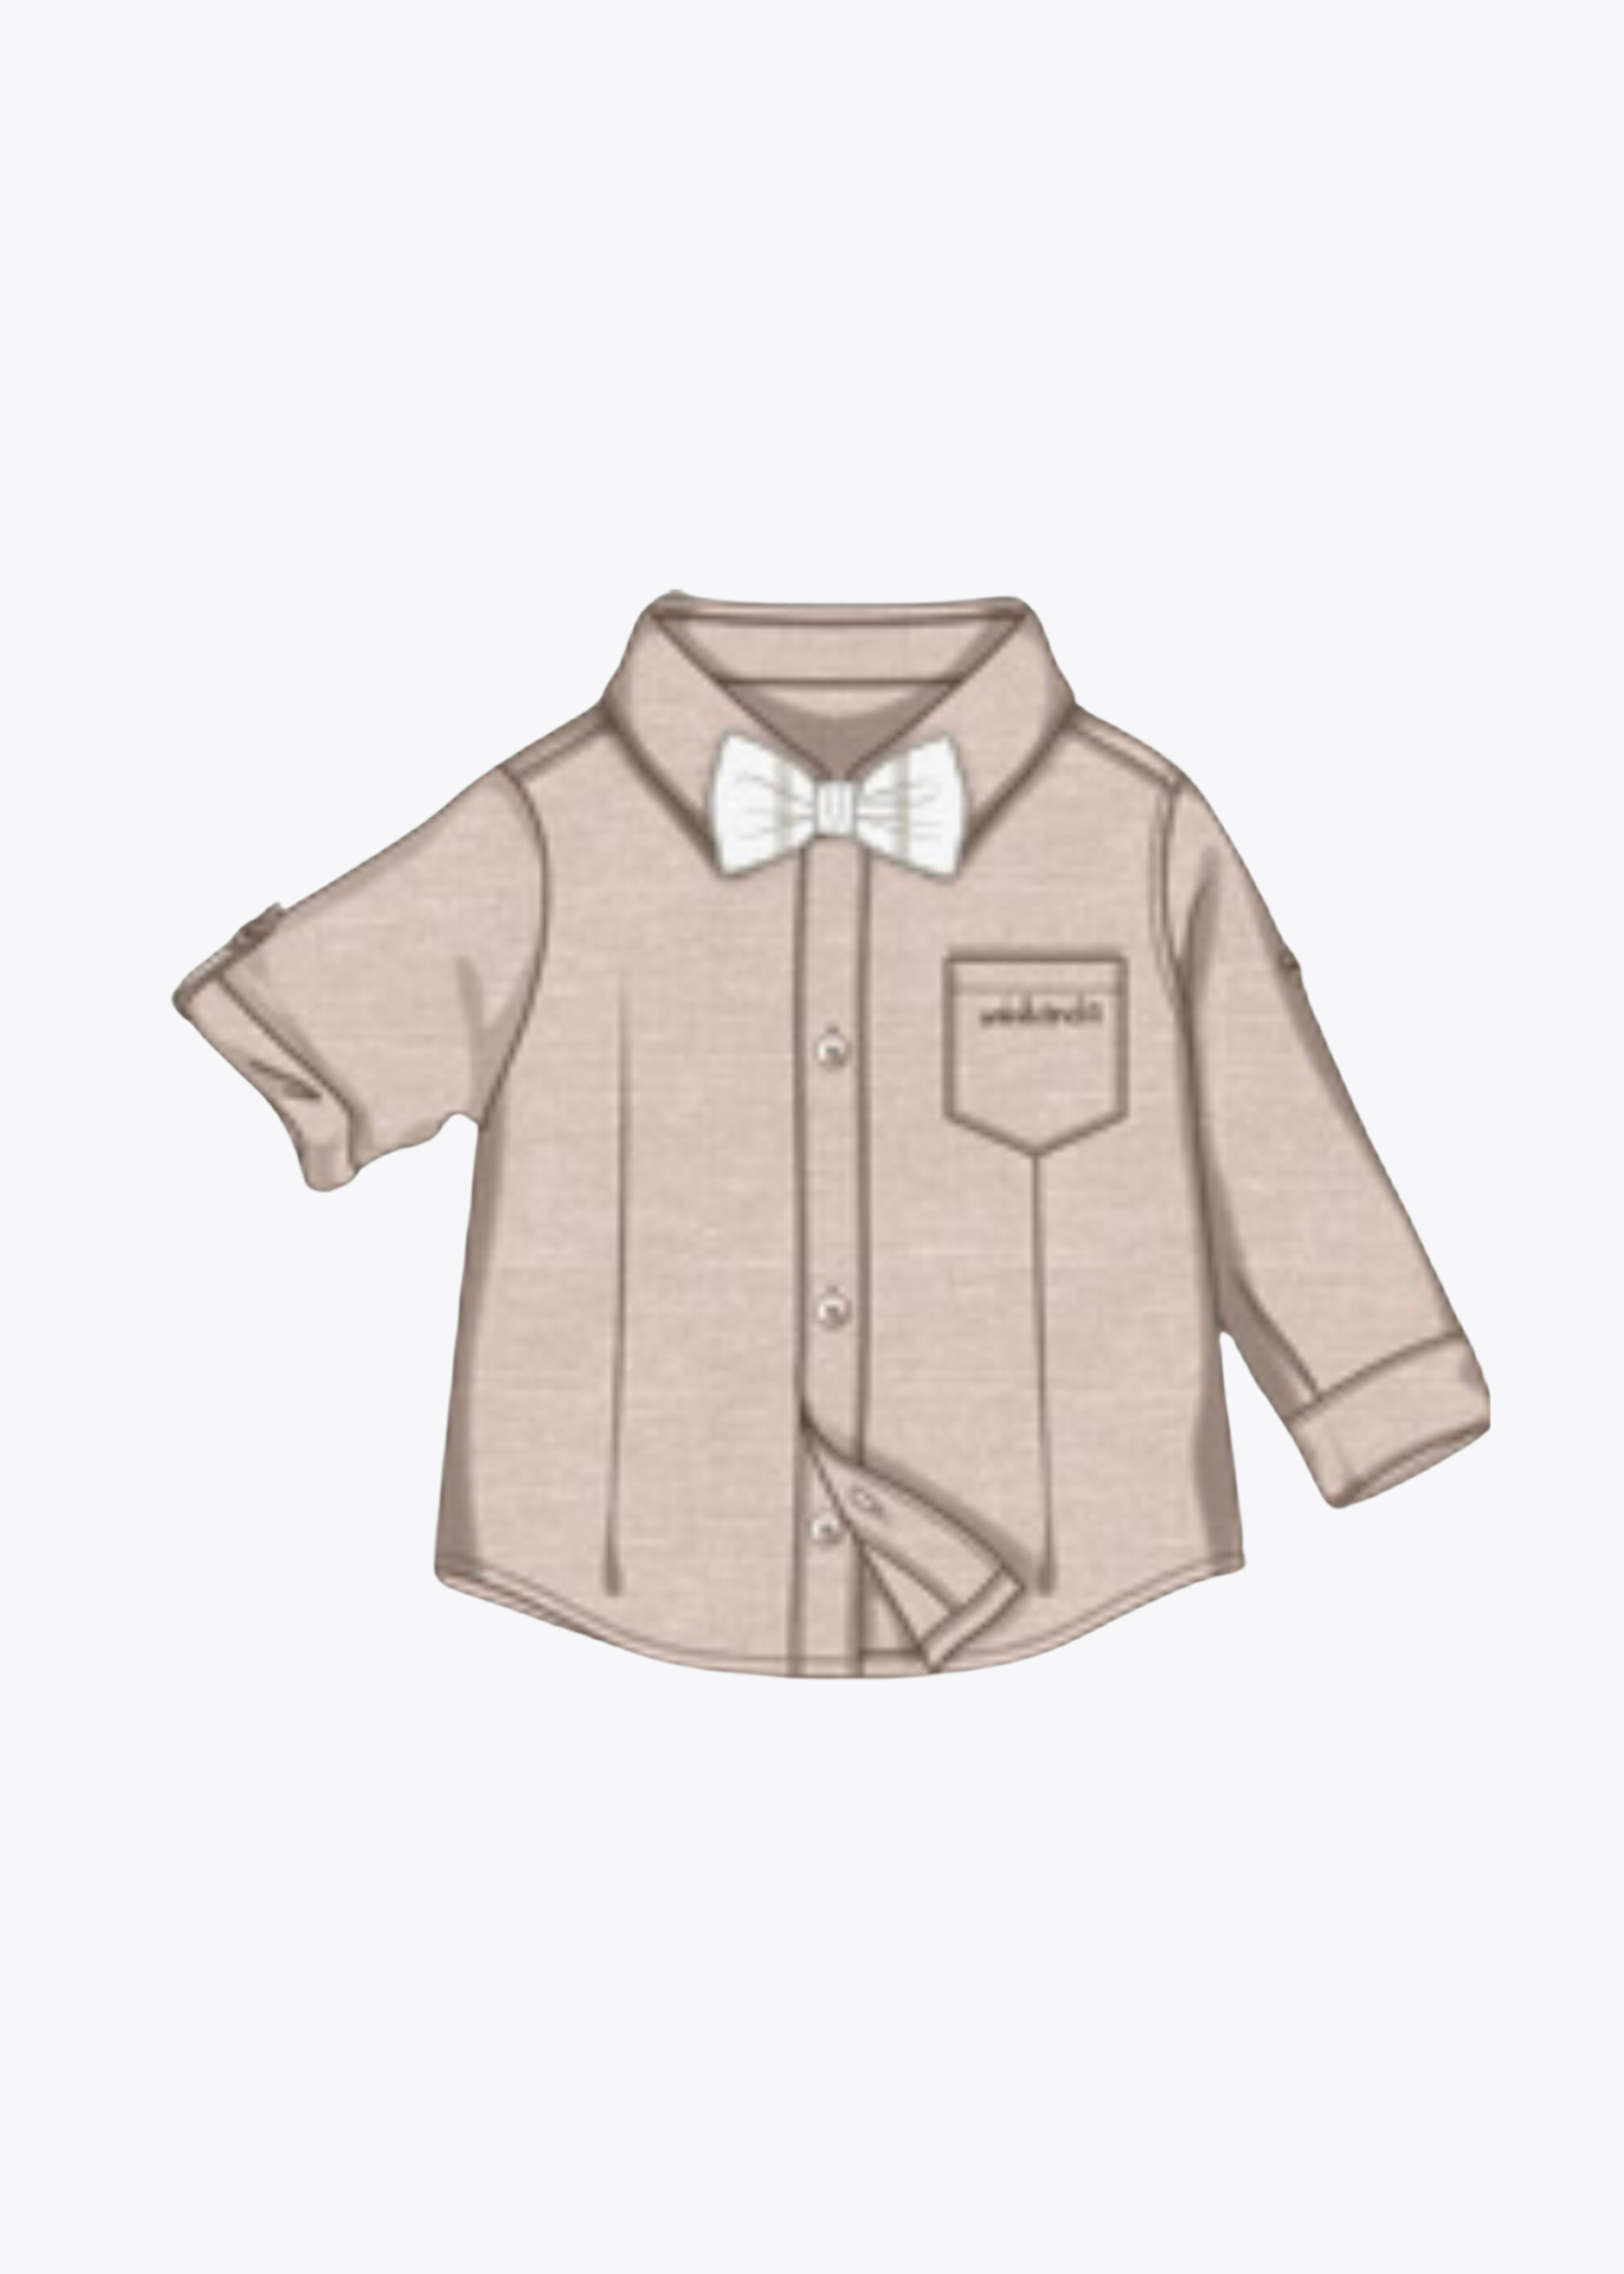 Minibanda Shirt in Beige with Bow Tie